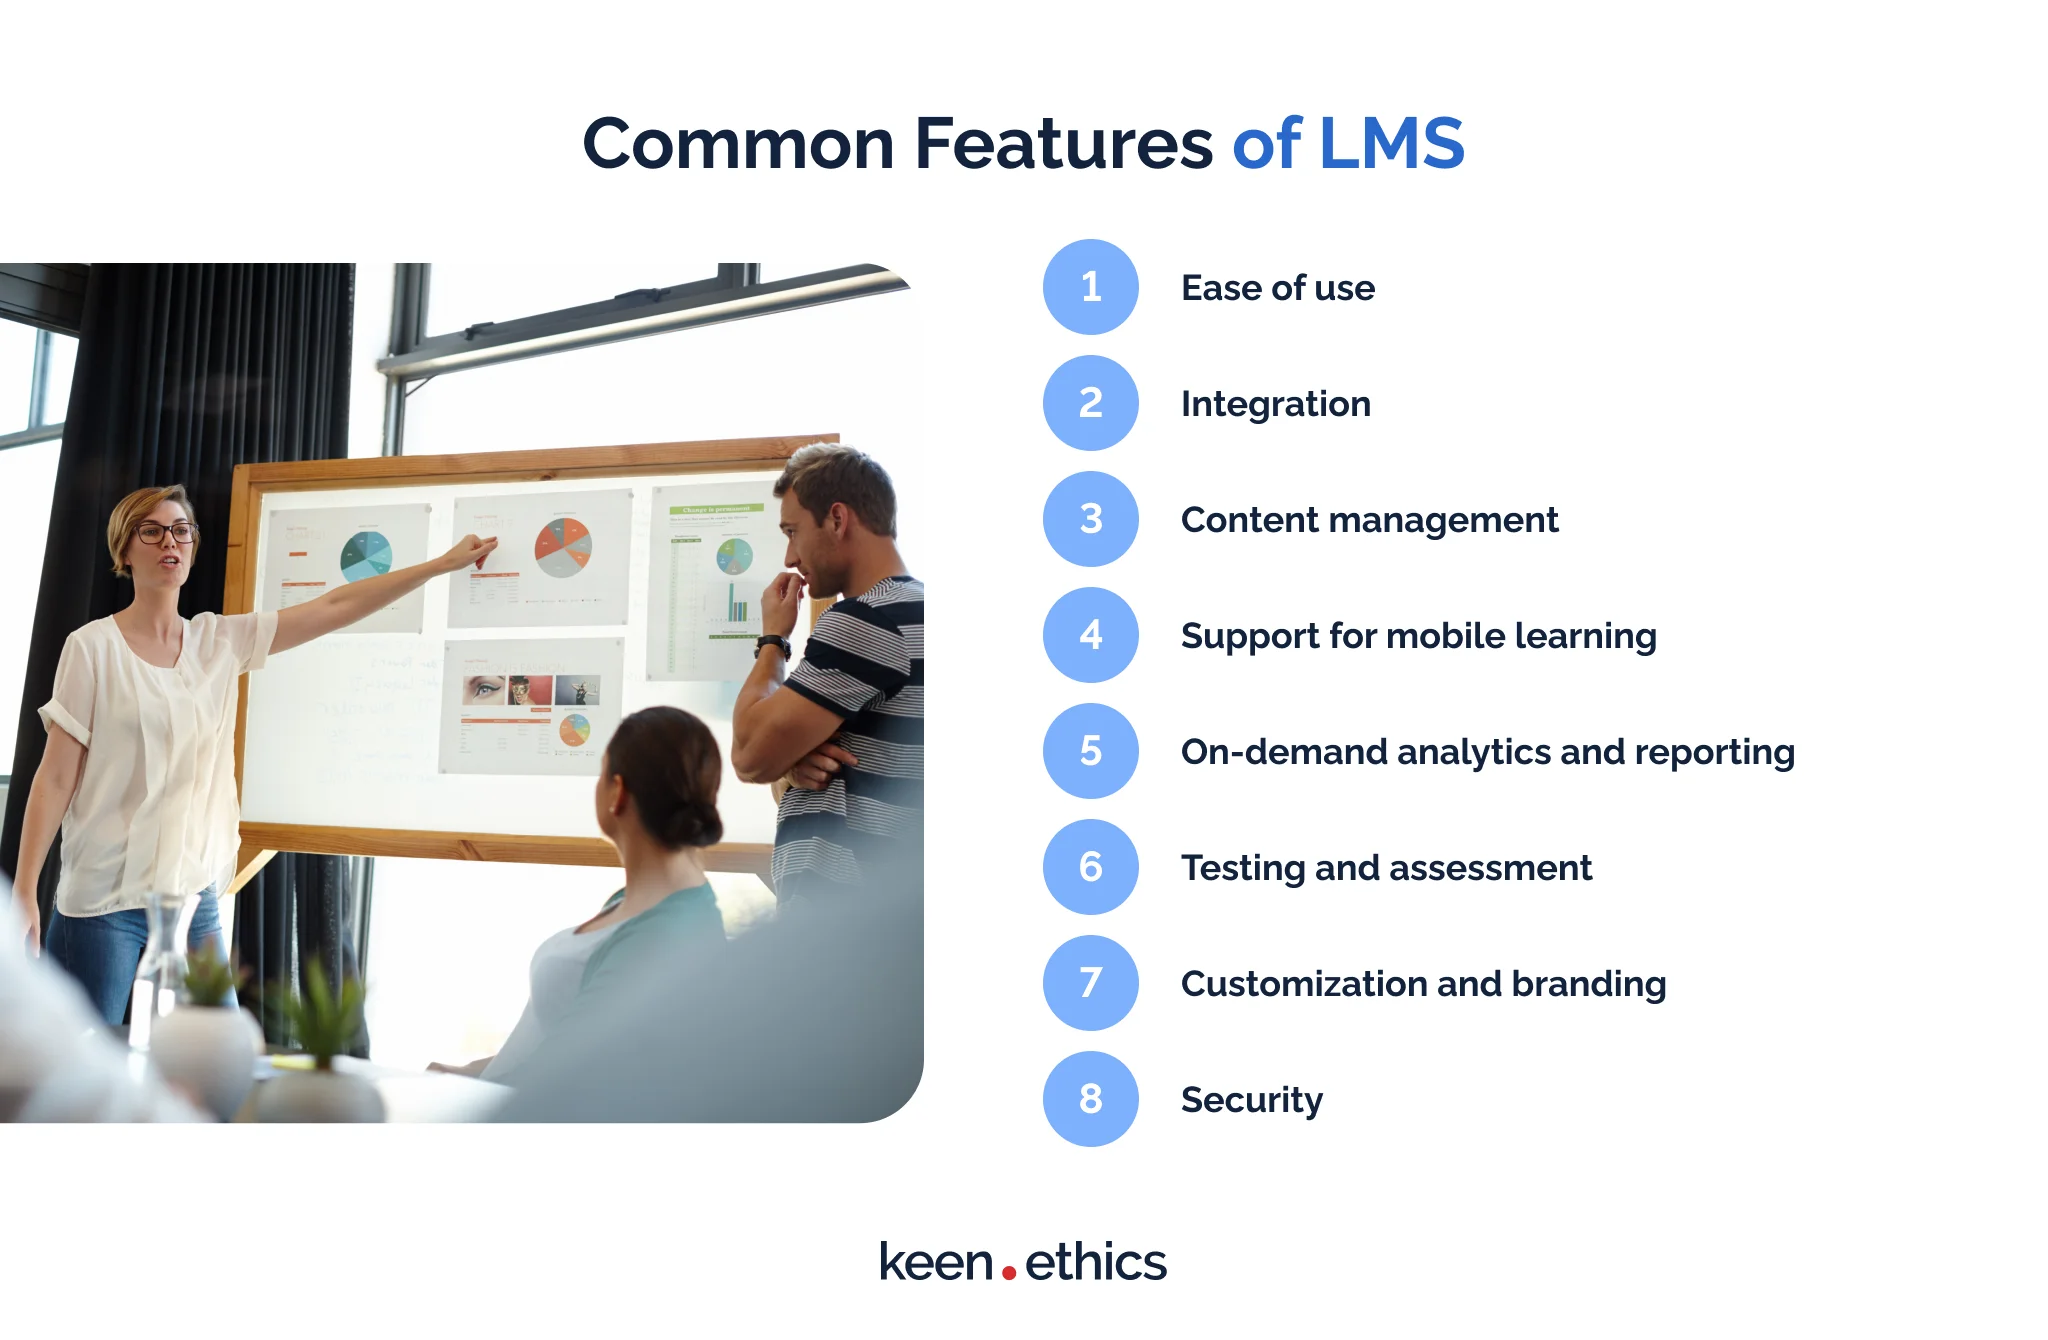 Common features of LMS